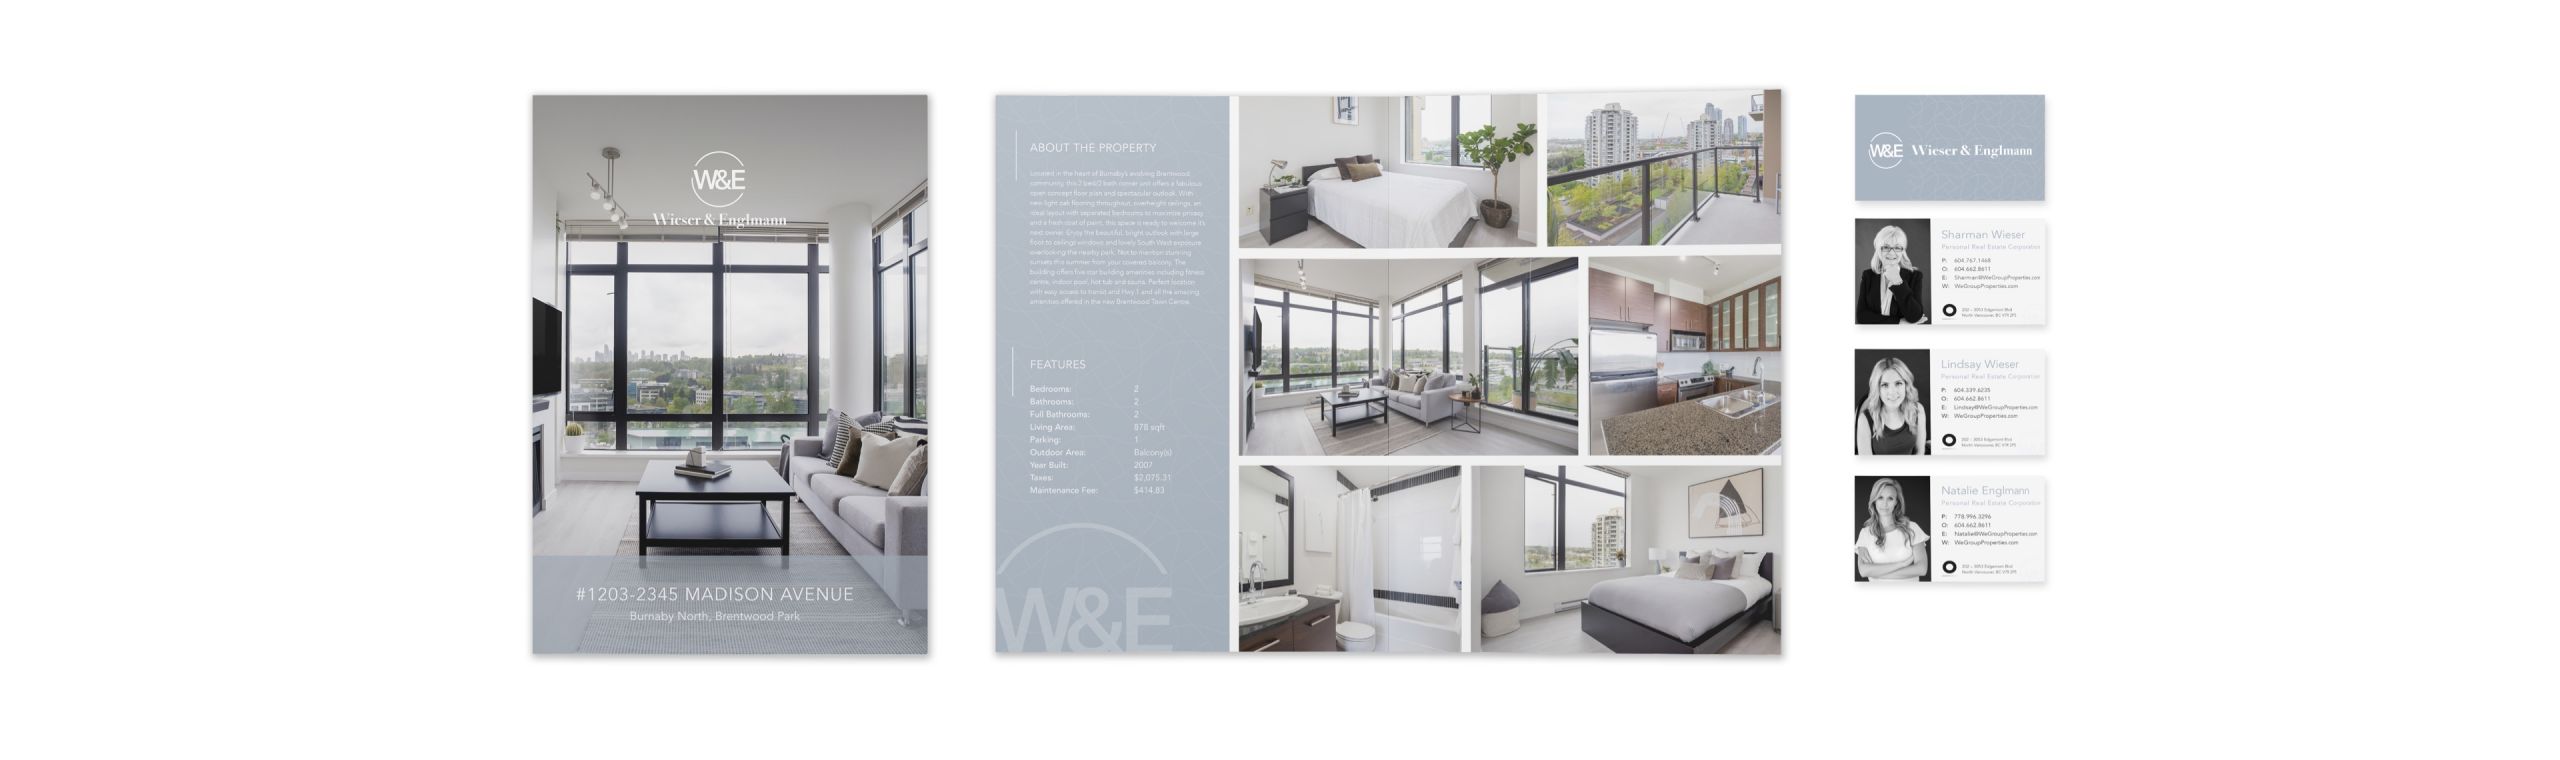 Custom print media layout for both property listing and business cards, created exclusively for WE Group.